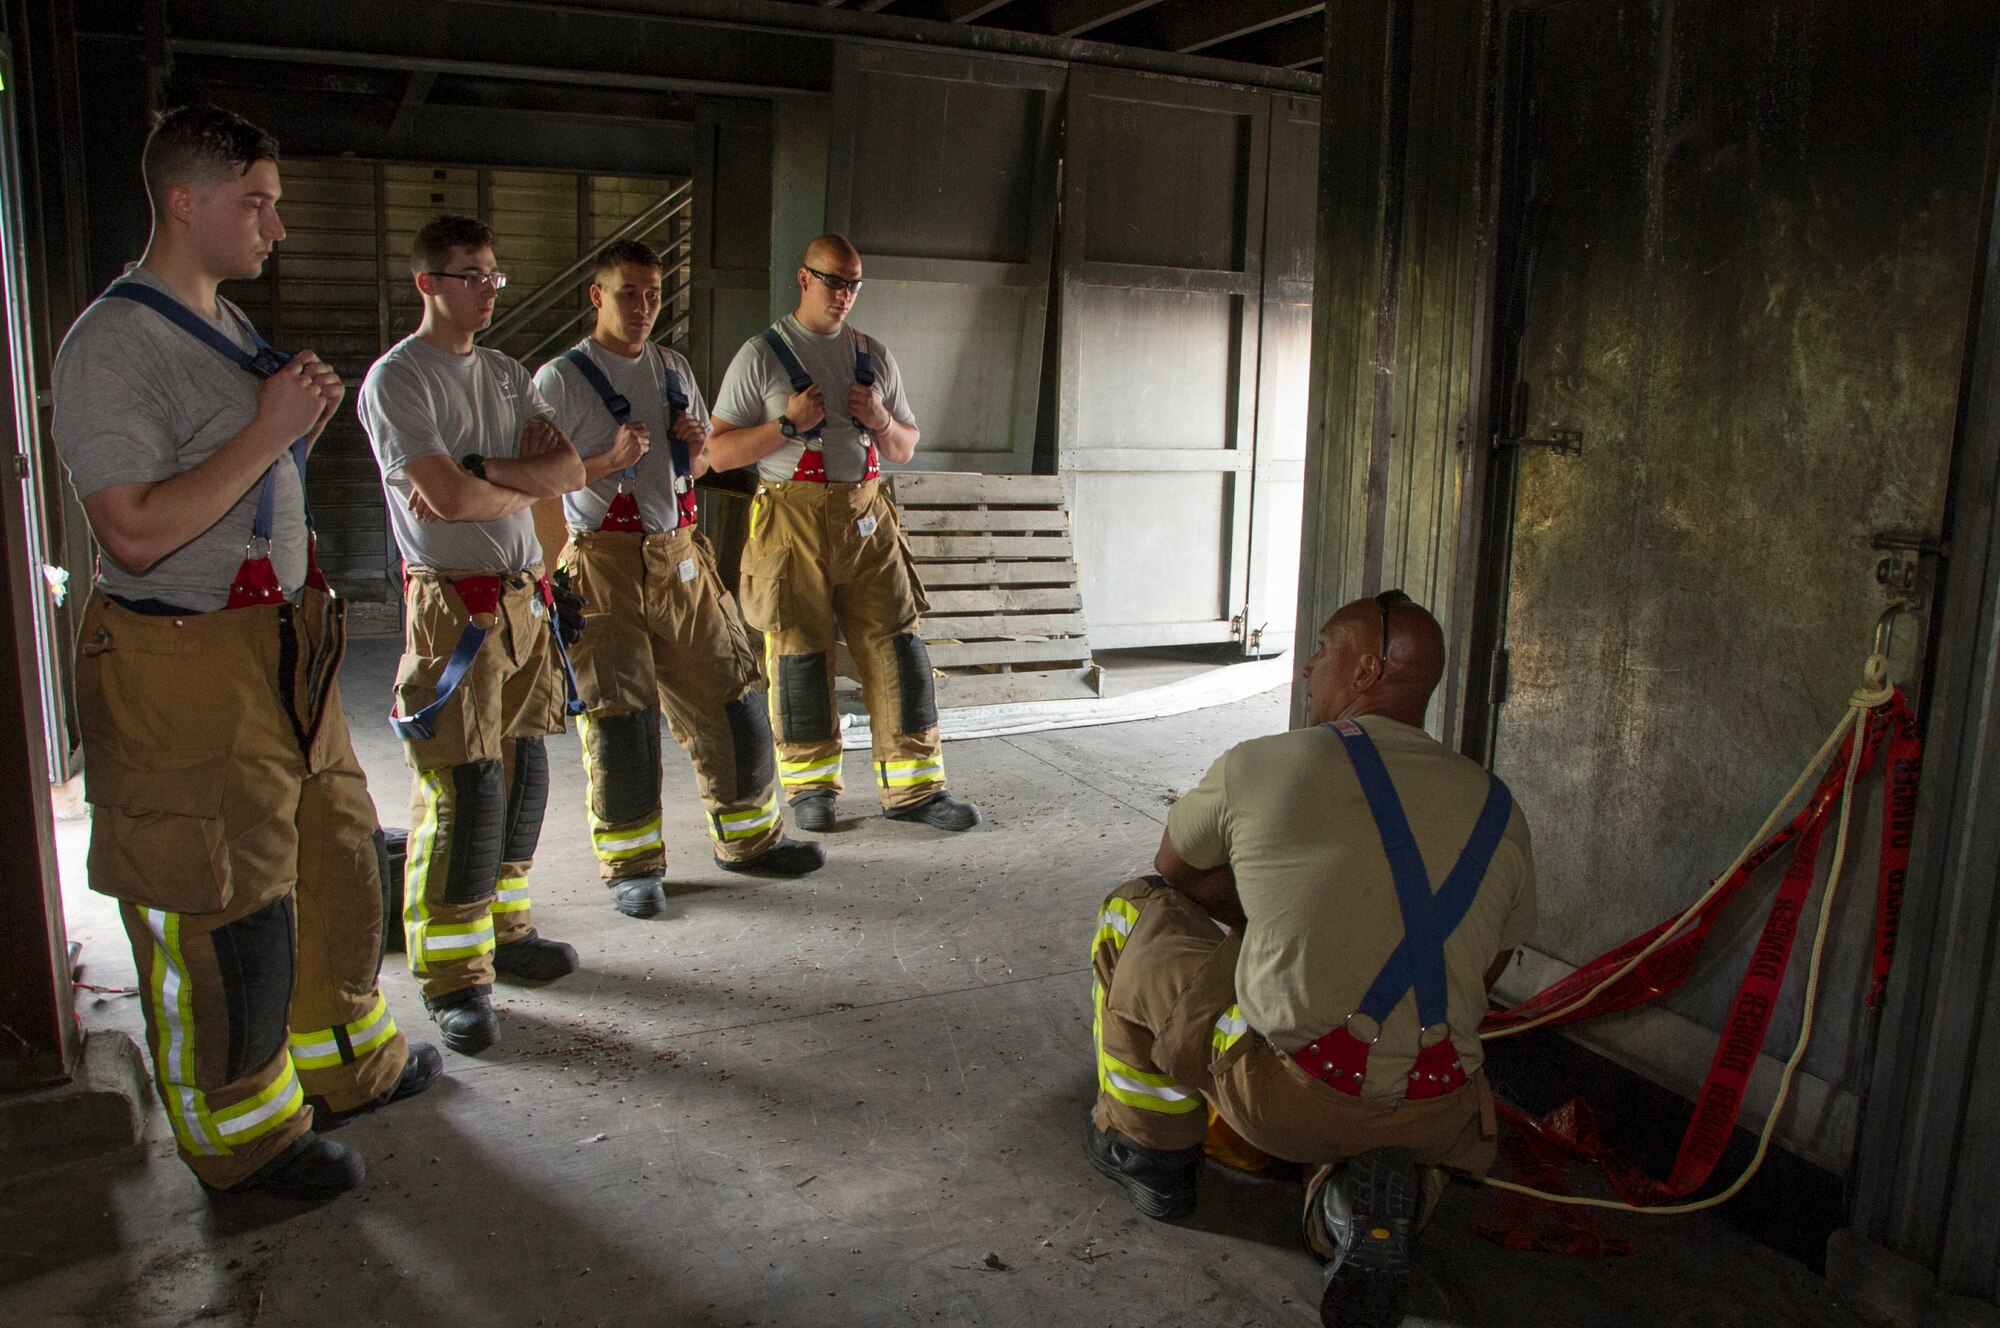 U.S. Air Force Master Sgt. Matthew Kaea, right, of Makakilo, Hawaii, a member of the 624th Civil Engineer Squadron from Joint Base Pearl Harbor-Hickam, Hawaii, explains how to maneuver through a simulated smoke-filled building using a tag line during the first-ever Air Force Reserve Command Firefighter Rescue and Survival Course at Dobbins Air Reserve Base, Ga., April 18, 2017. Twenty Citizen Airmen participated in the intense 50-hour course held at the 622nd Civil Engineer Group expeditionary combat support-training certification center, which focused on a Rapid Intervention Crew, or RIC. The RIC is a dedicated and specially trained group of firefighters whose responsibilities include safely evacuating a distressed firefighter from a structure. (U.S. Air Force photo by Master Sgt. Theanne K. Herrmann)